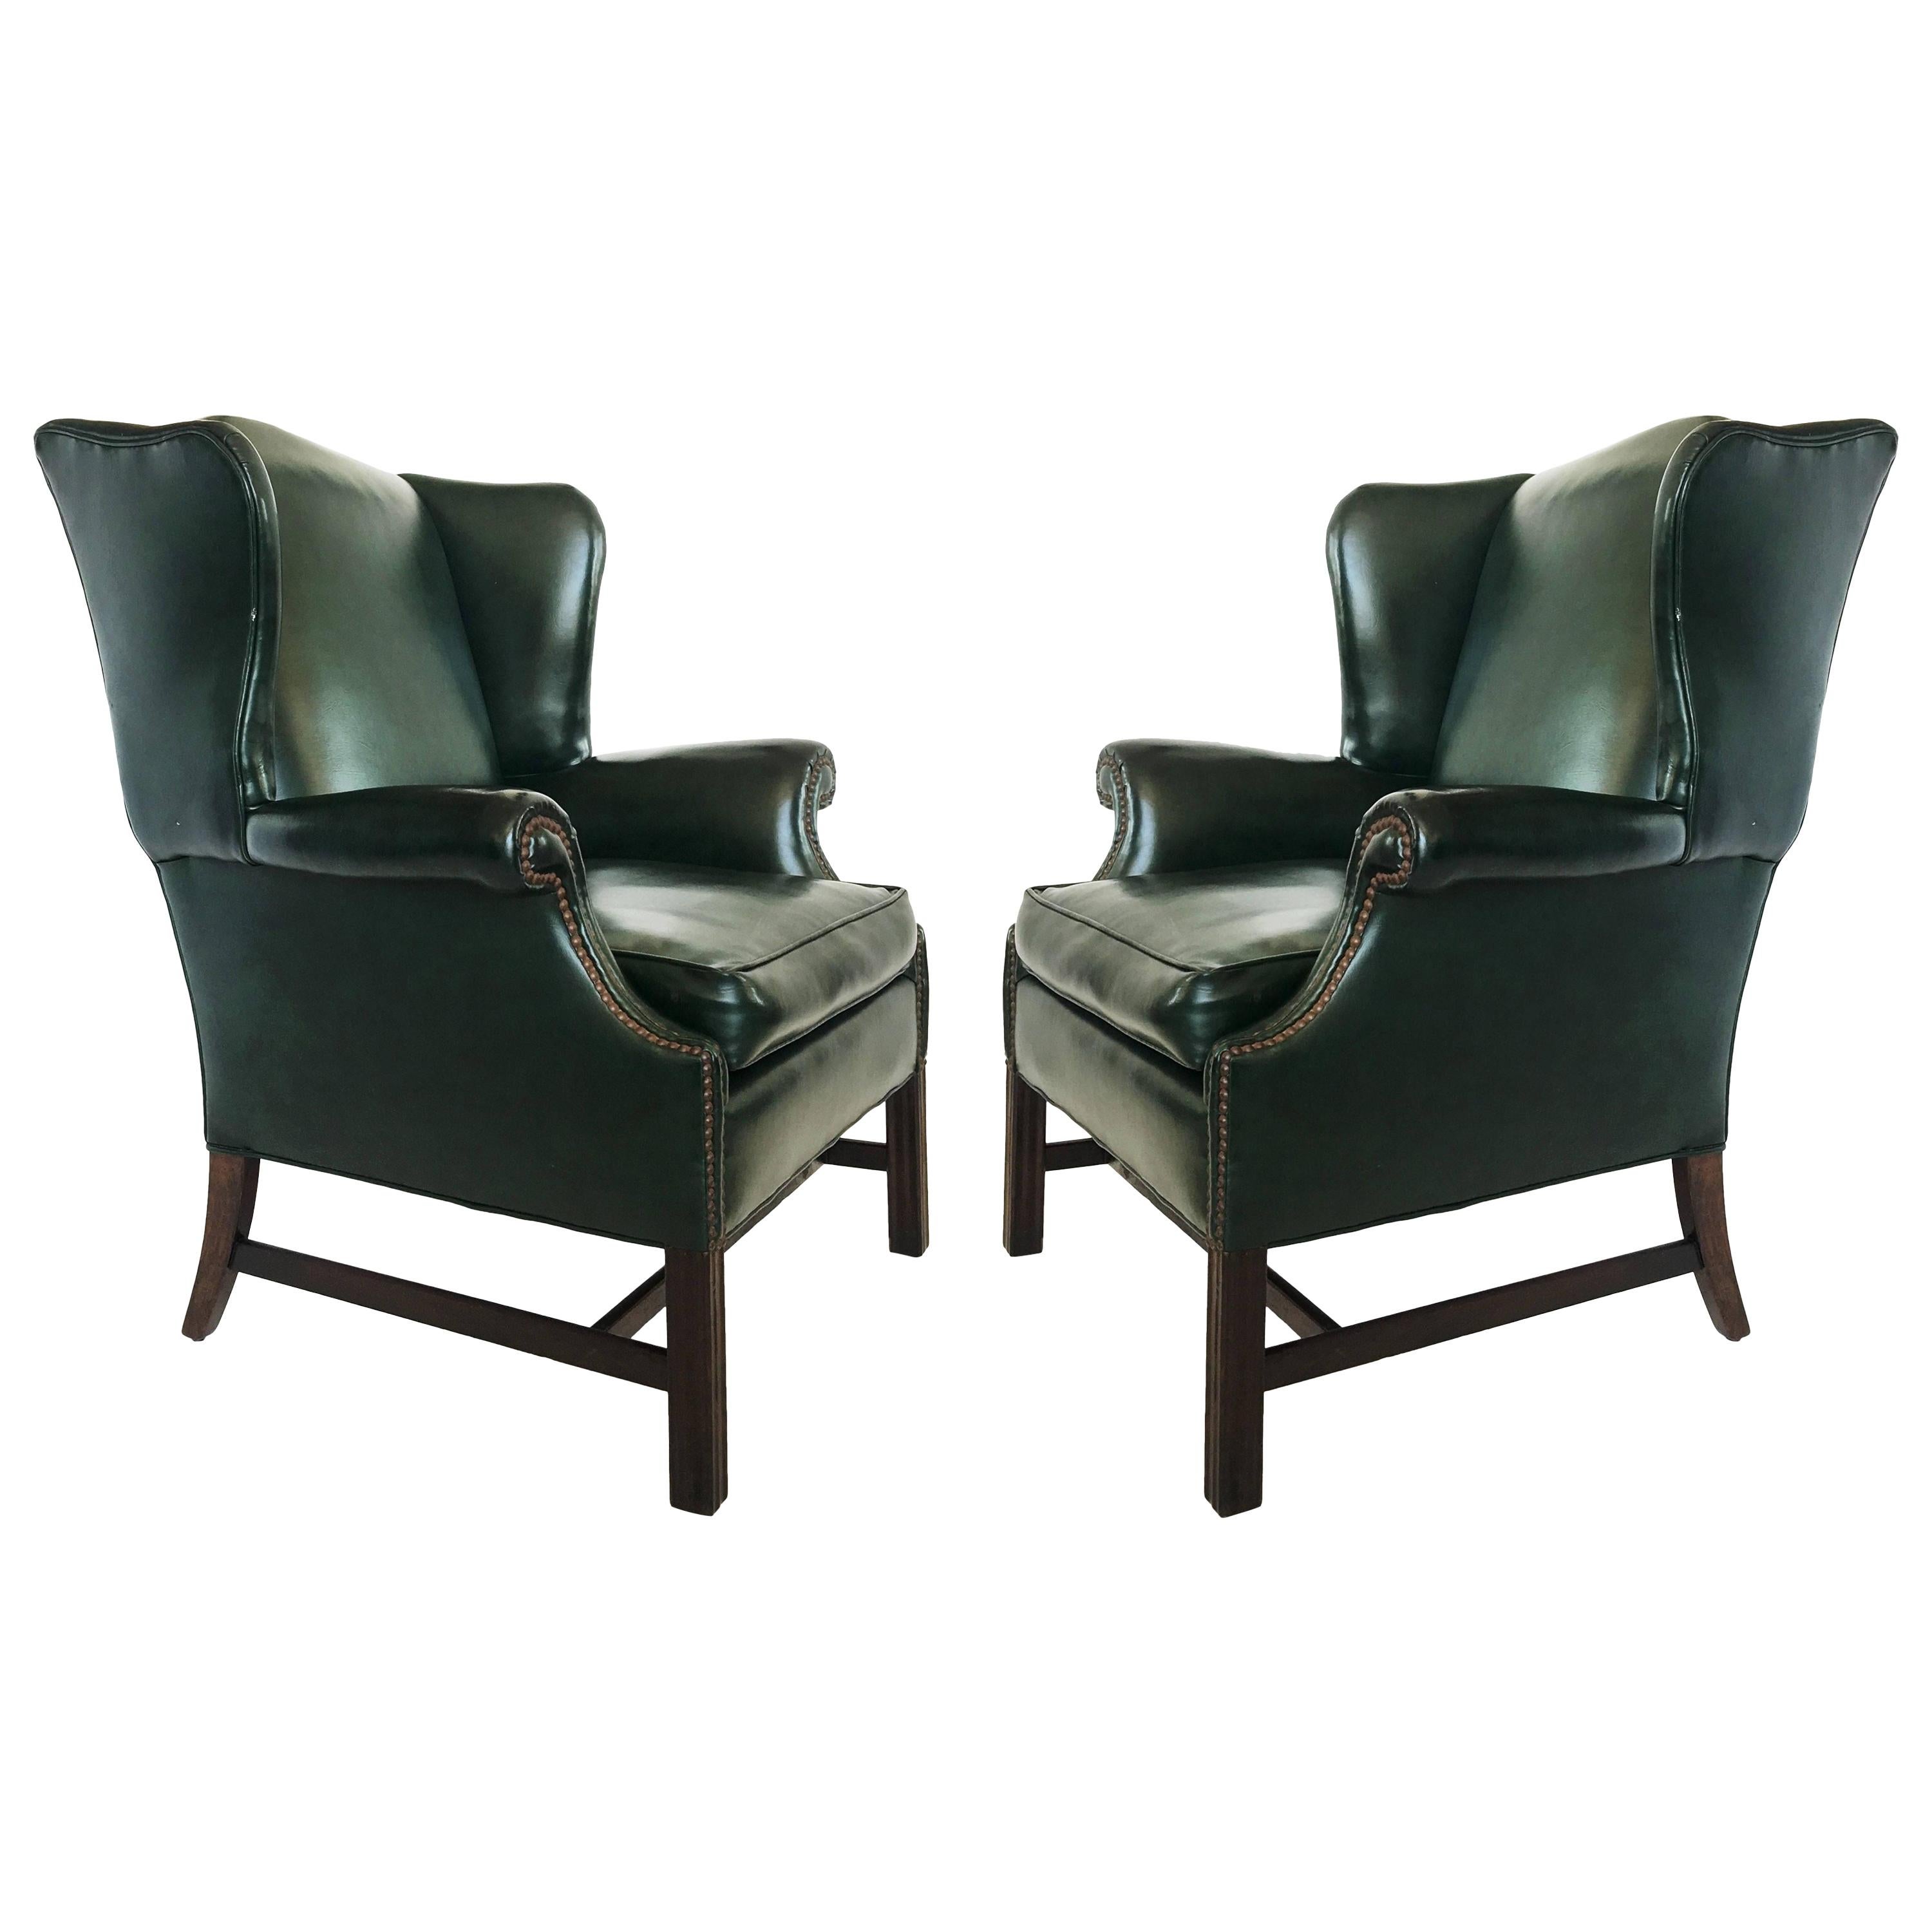 Pair of Georgian Forest Green Leather Wingback Armchairs